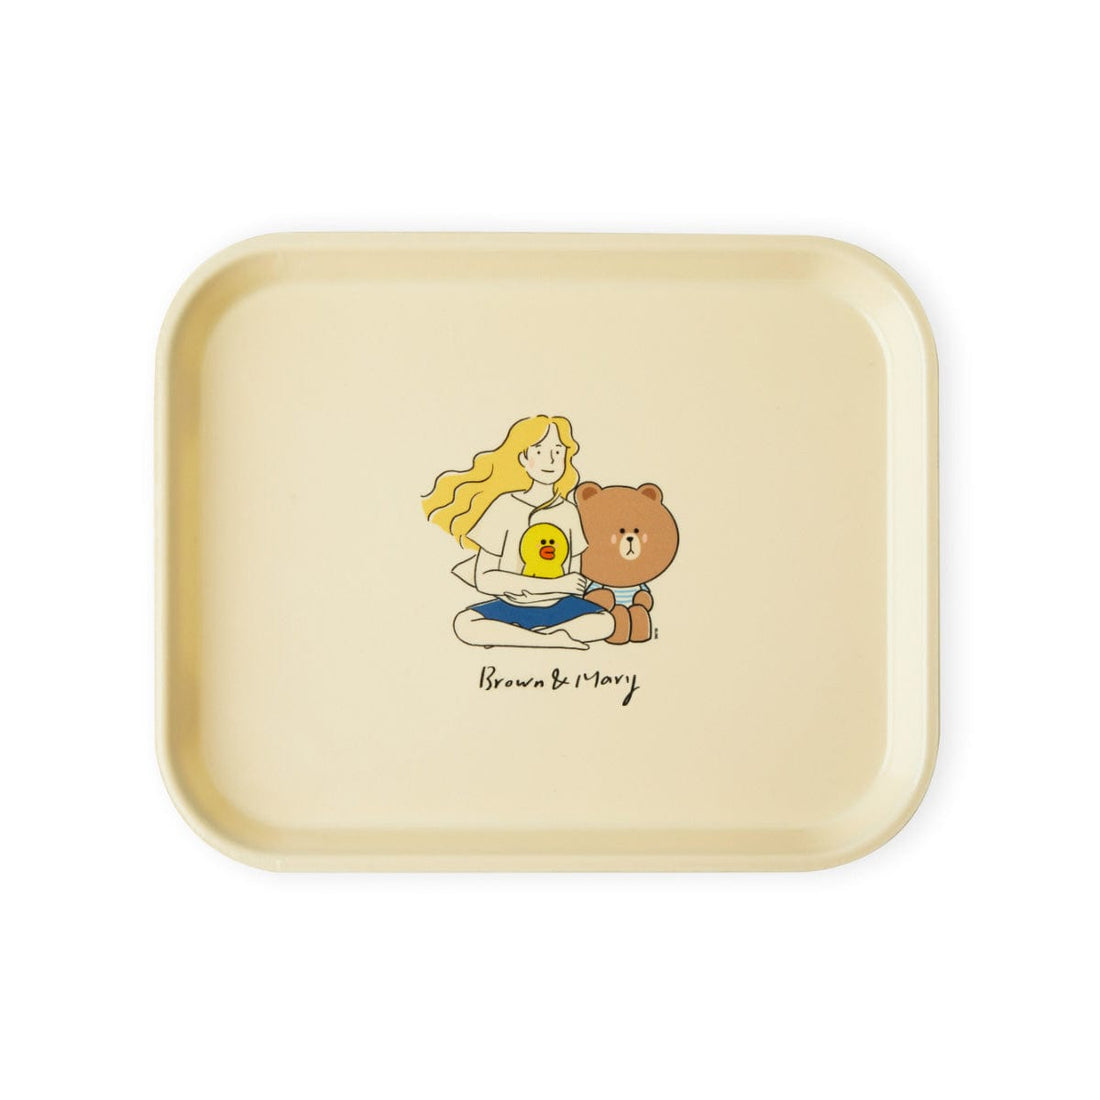 LINE FRIENDS LIVING TRAY M LINE FRIENDS BROWN DRAWING MARY TRAY (M)